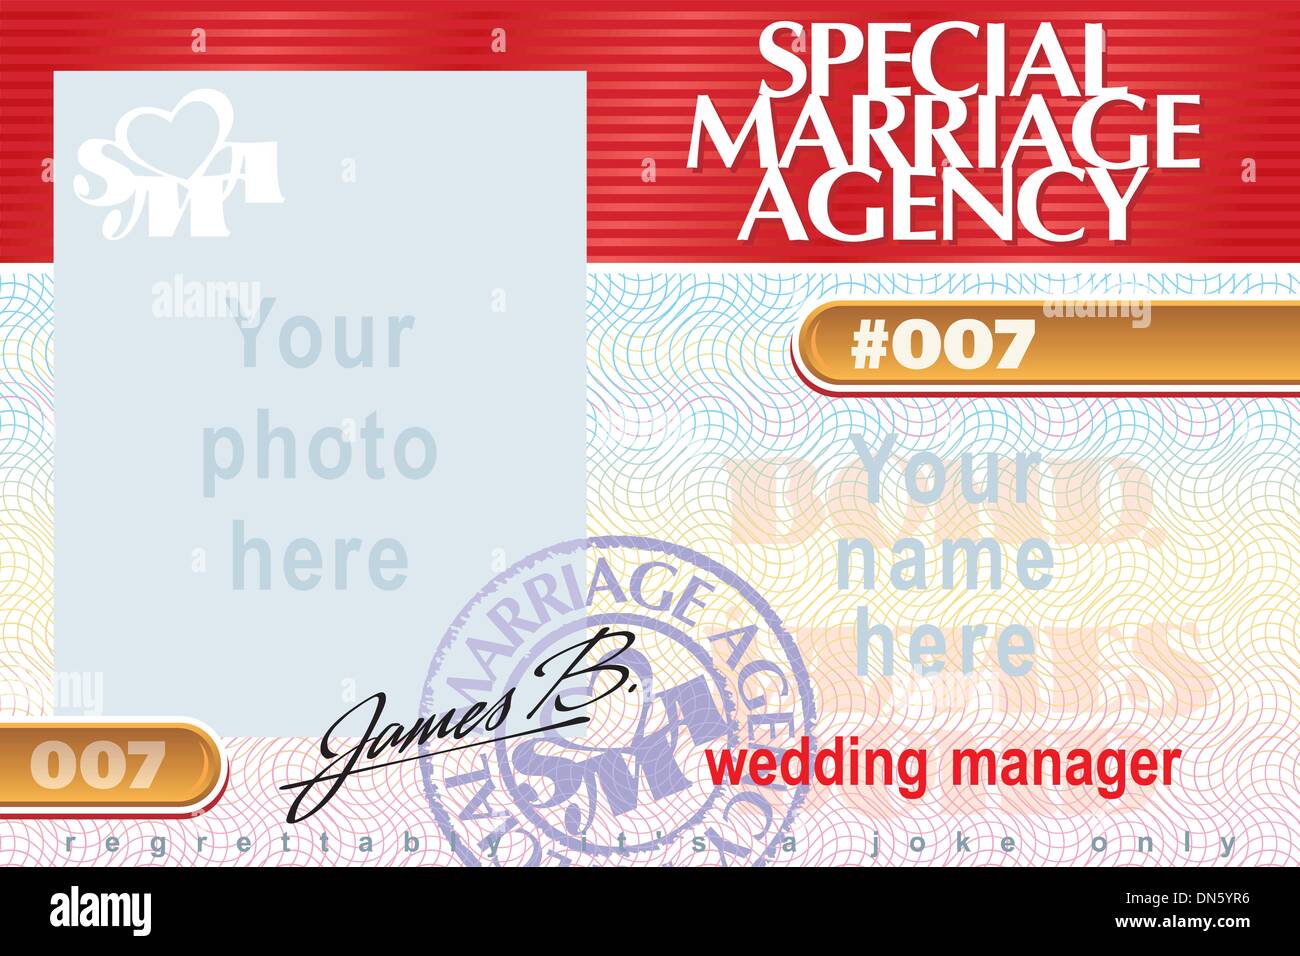 Identity card Special Marriage Agency 007 Stock Vector